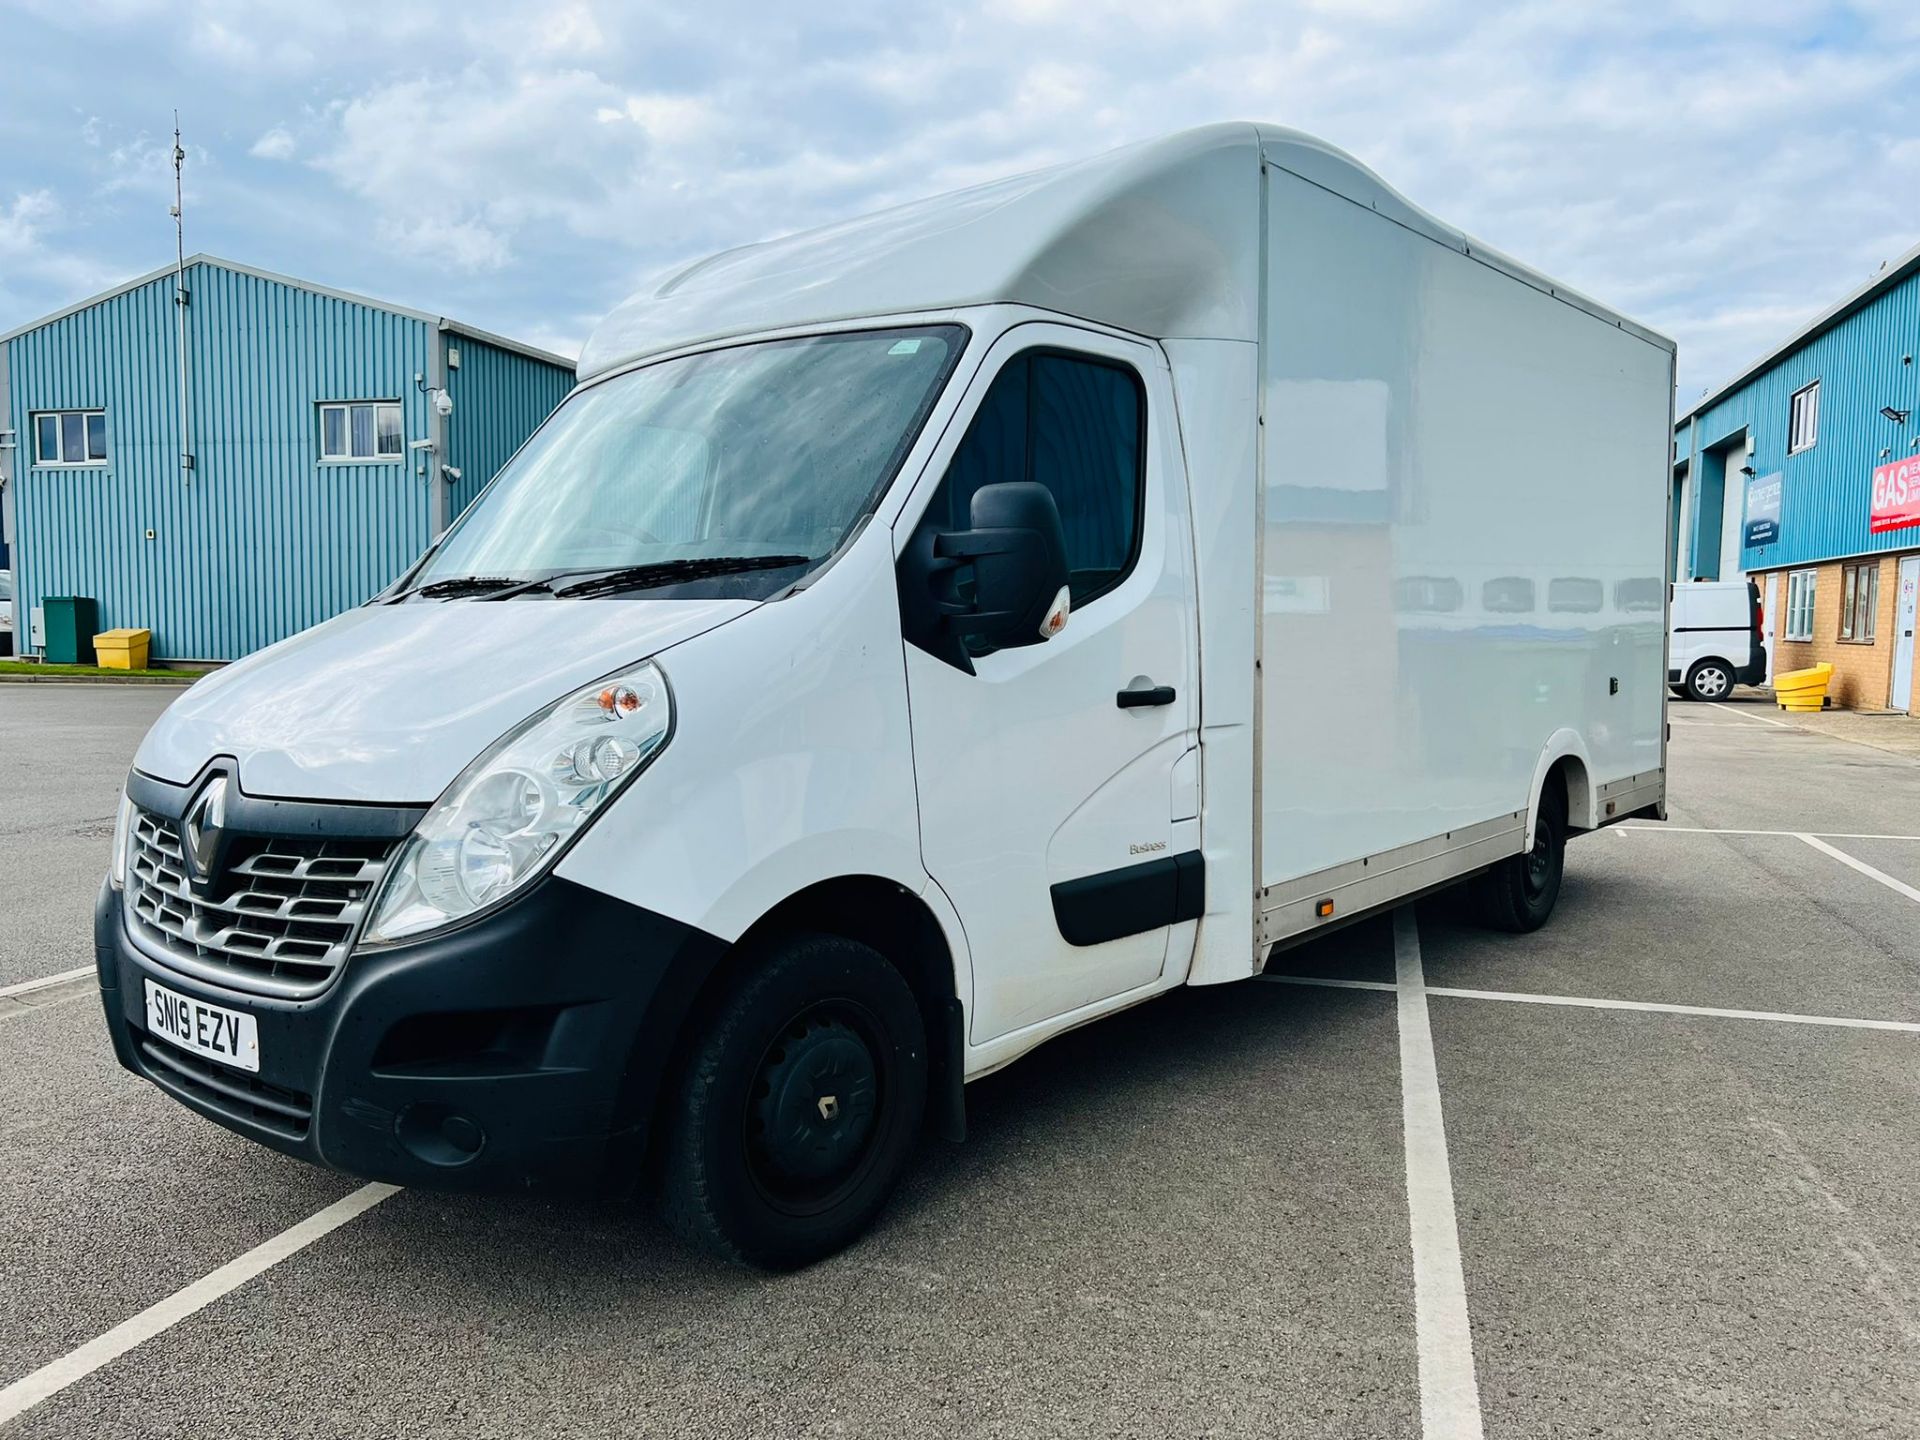 Renault Master 2.3DCI Low Loader Luton *LWB*-Euro 6 -130Bhp -2019 Model - *ULEZ COMPLIANT*- Air Con - Image 4 of 19